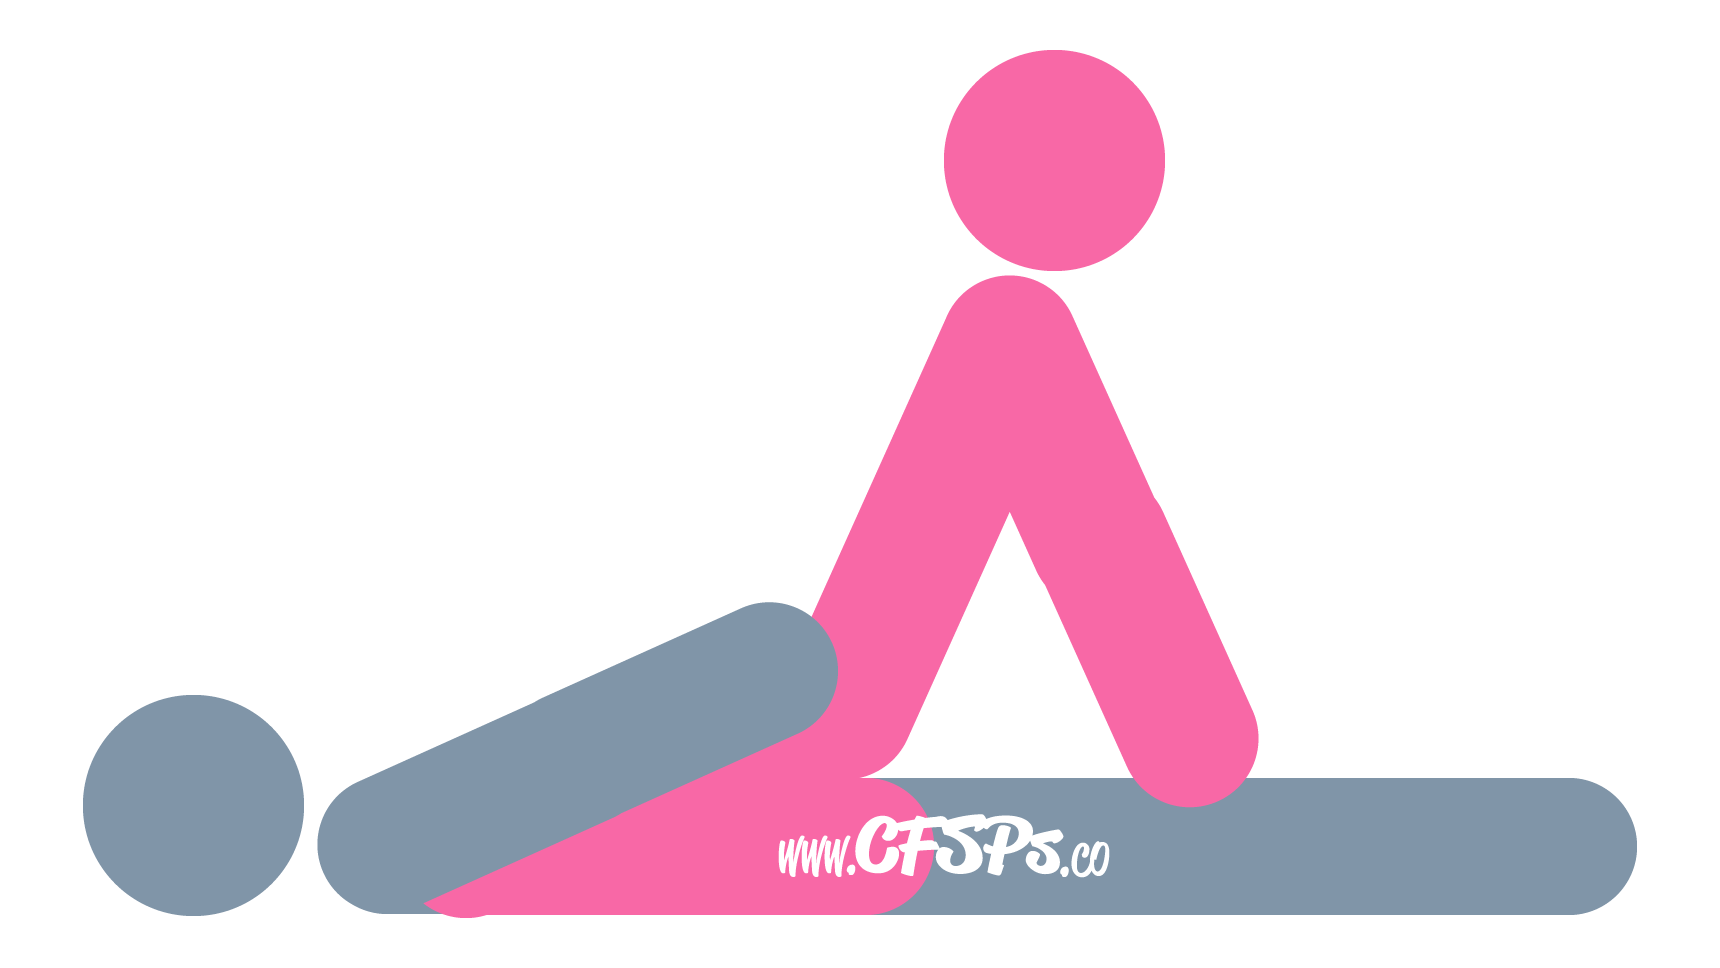 An illustration of the Clip sex position. This picture demonstrates how Clip is a woman-on-top sex position with easy access for manual clitoral stimulation while having sex.